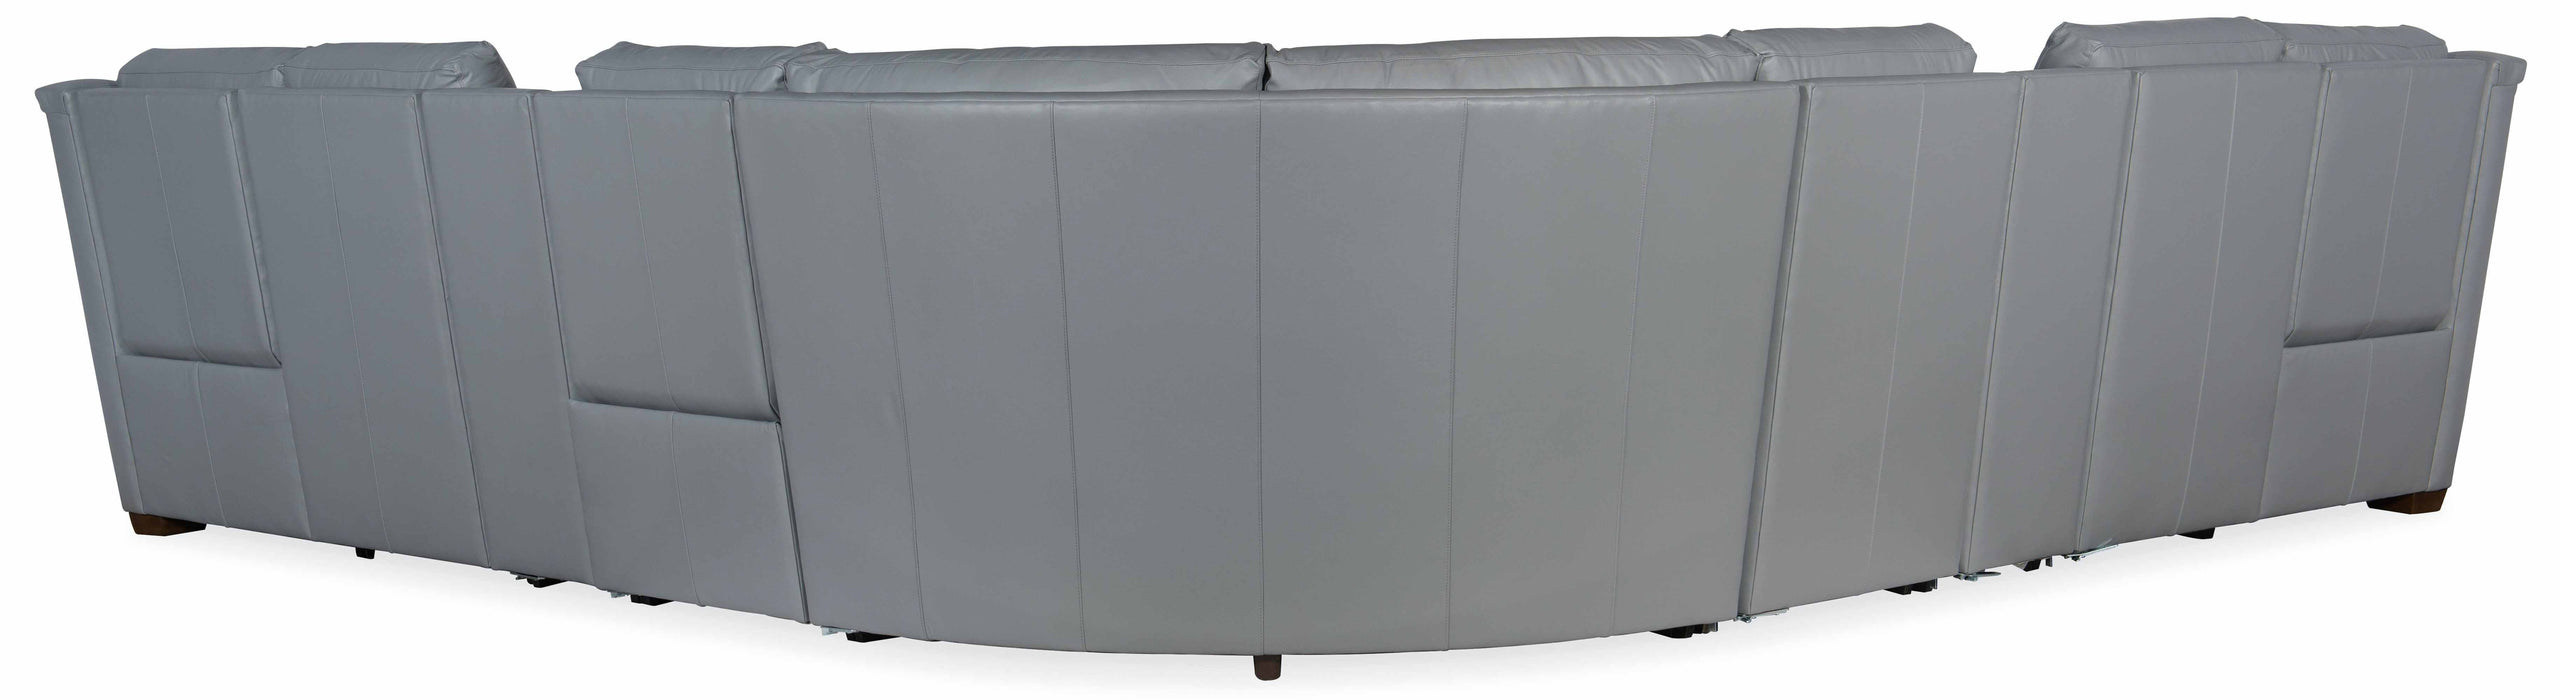 Huntsman Leather Power Reclining Sectional With Articulating Headrest